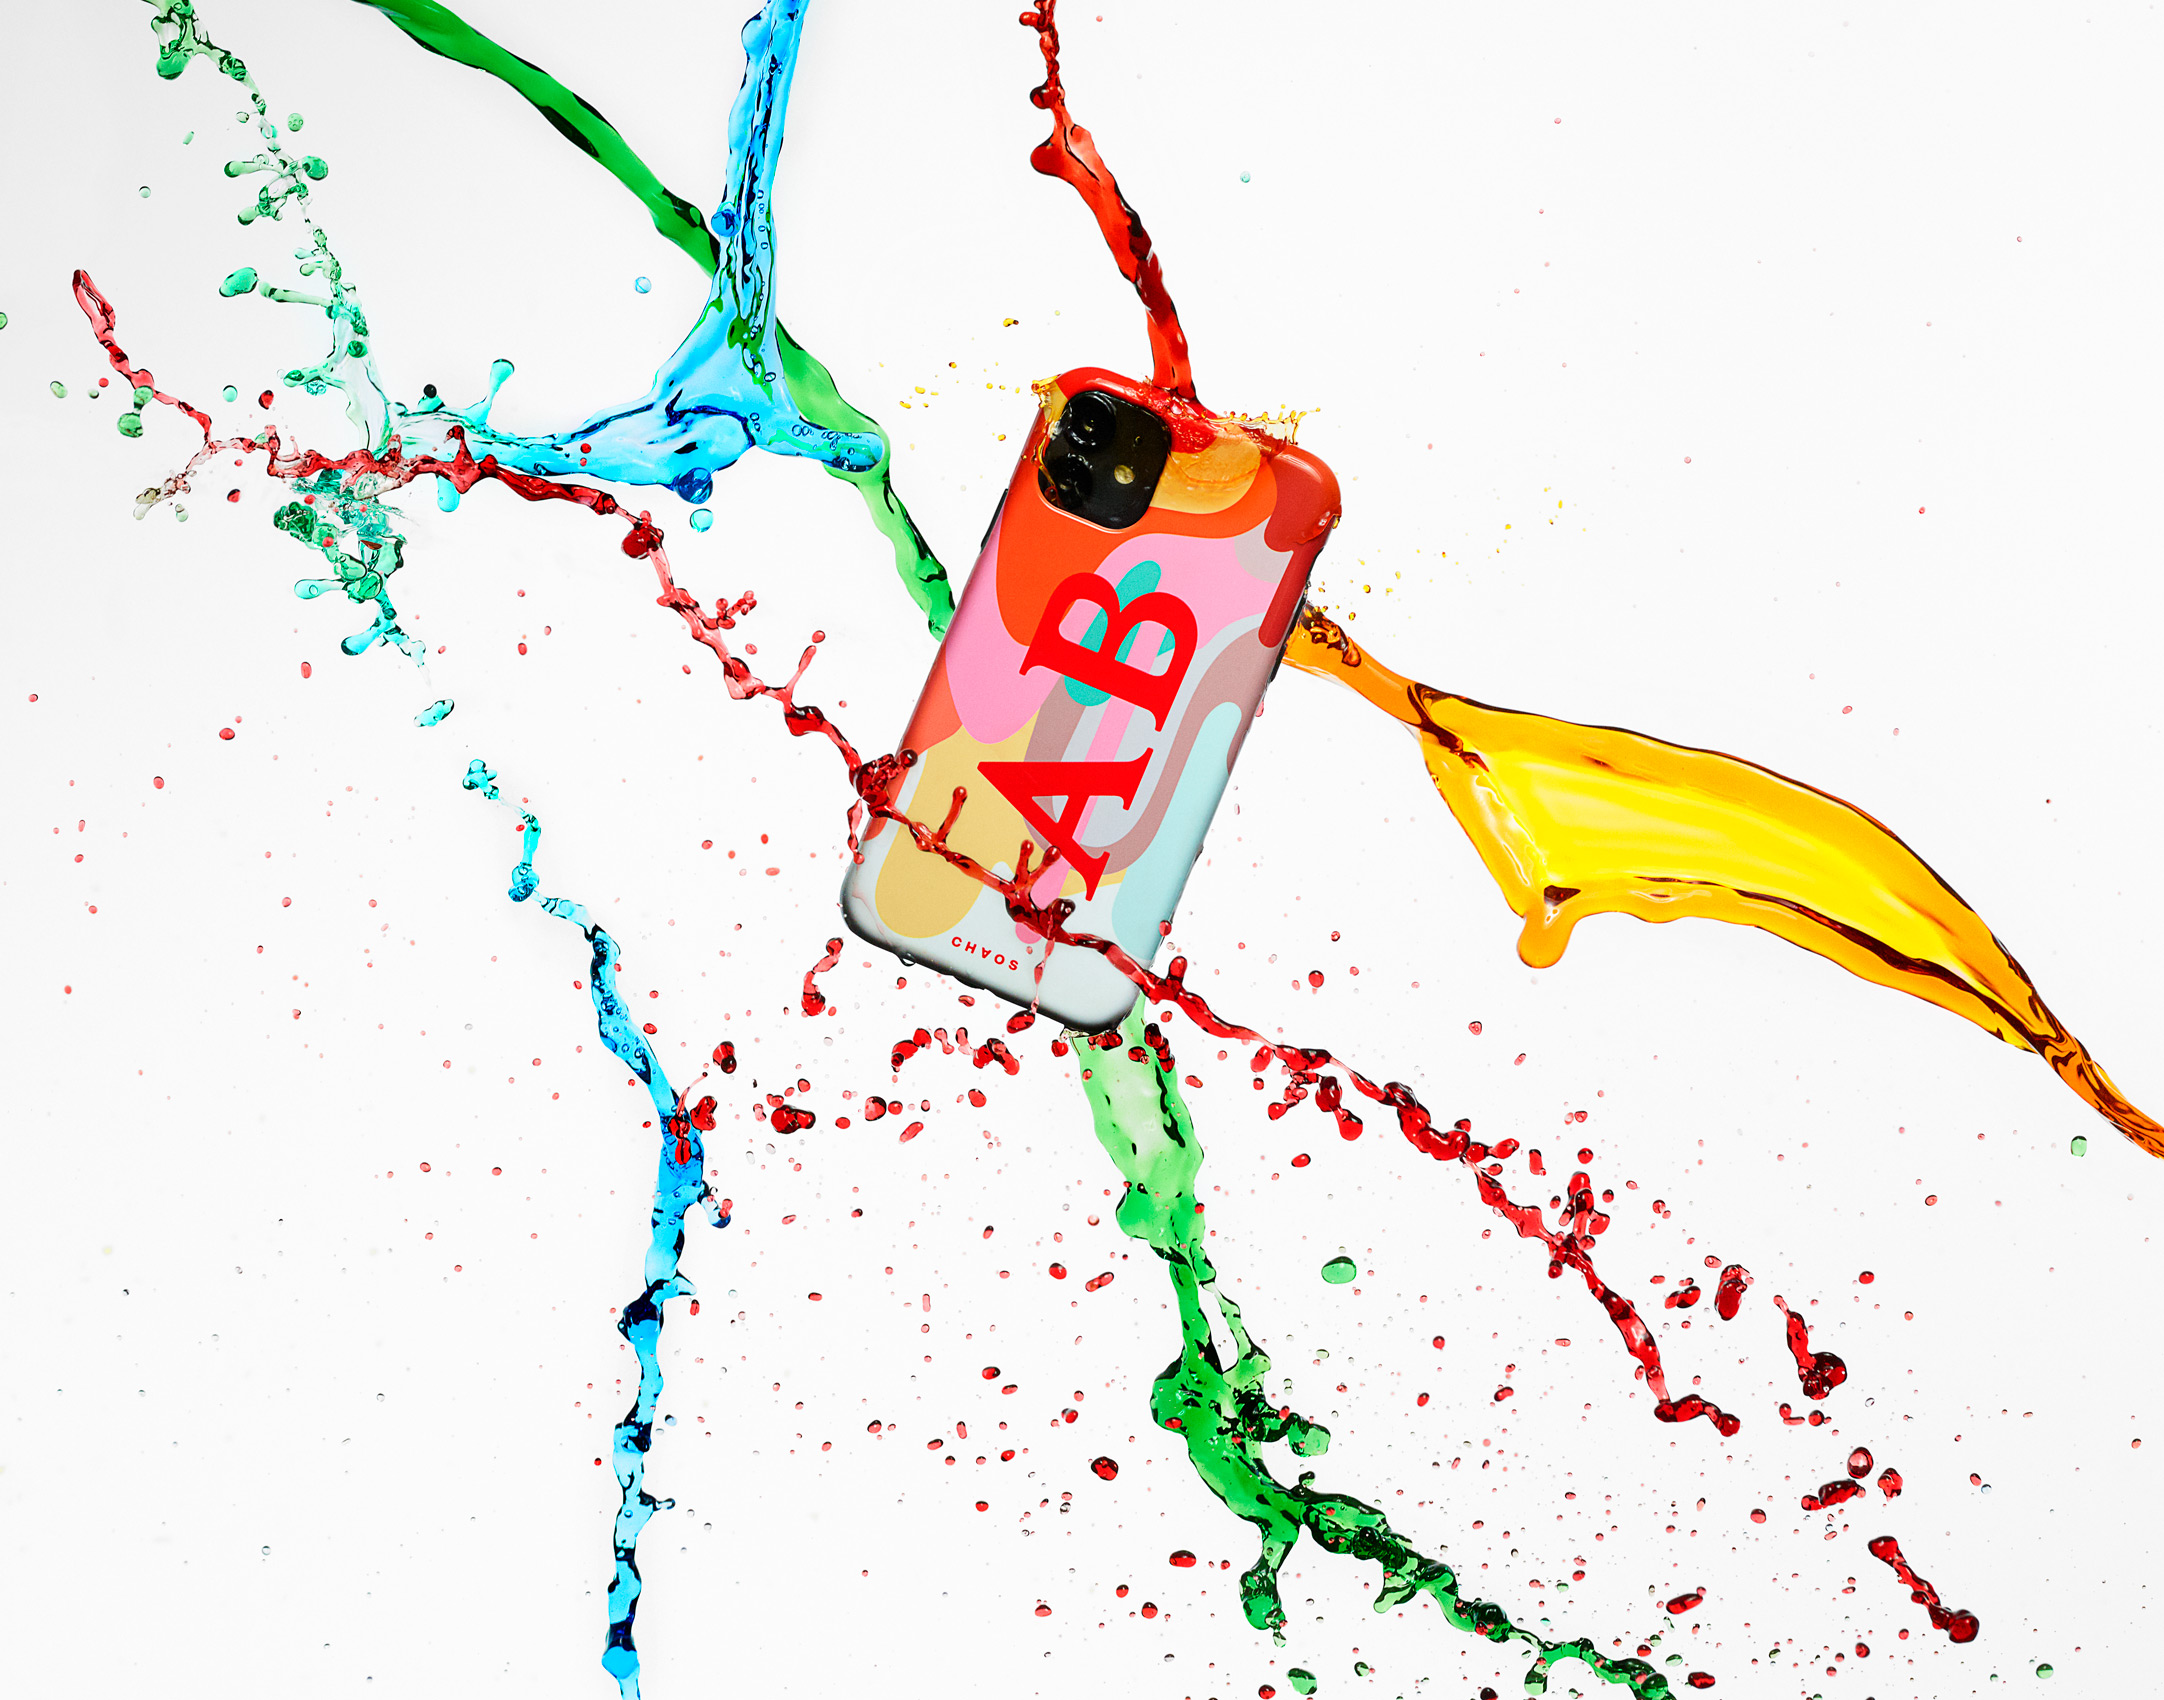 High speed splashing photography by Alexander Kent London based still life and product photographer.